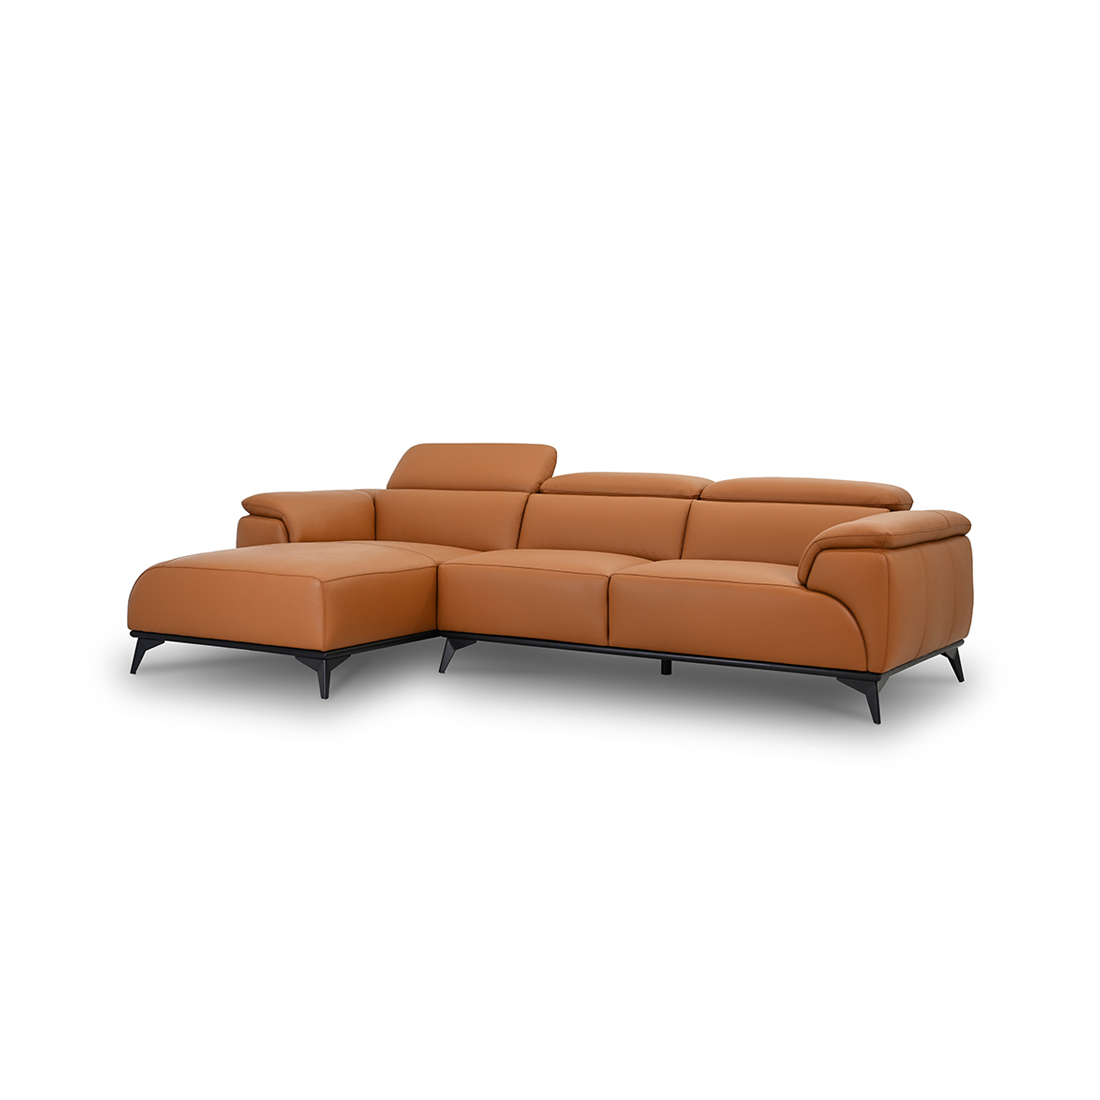 Mayfair Tan Leather Chaise Lounge